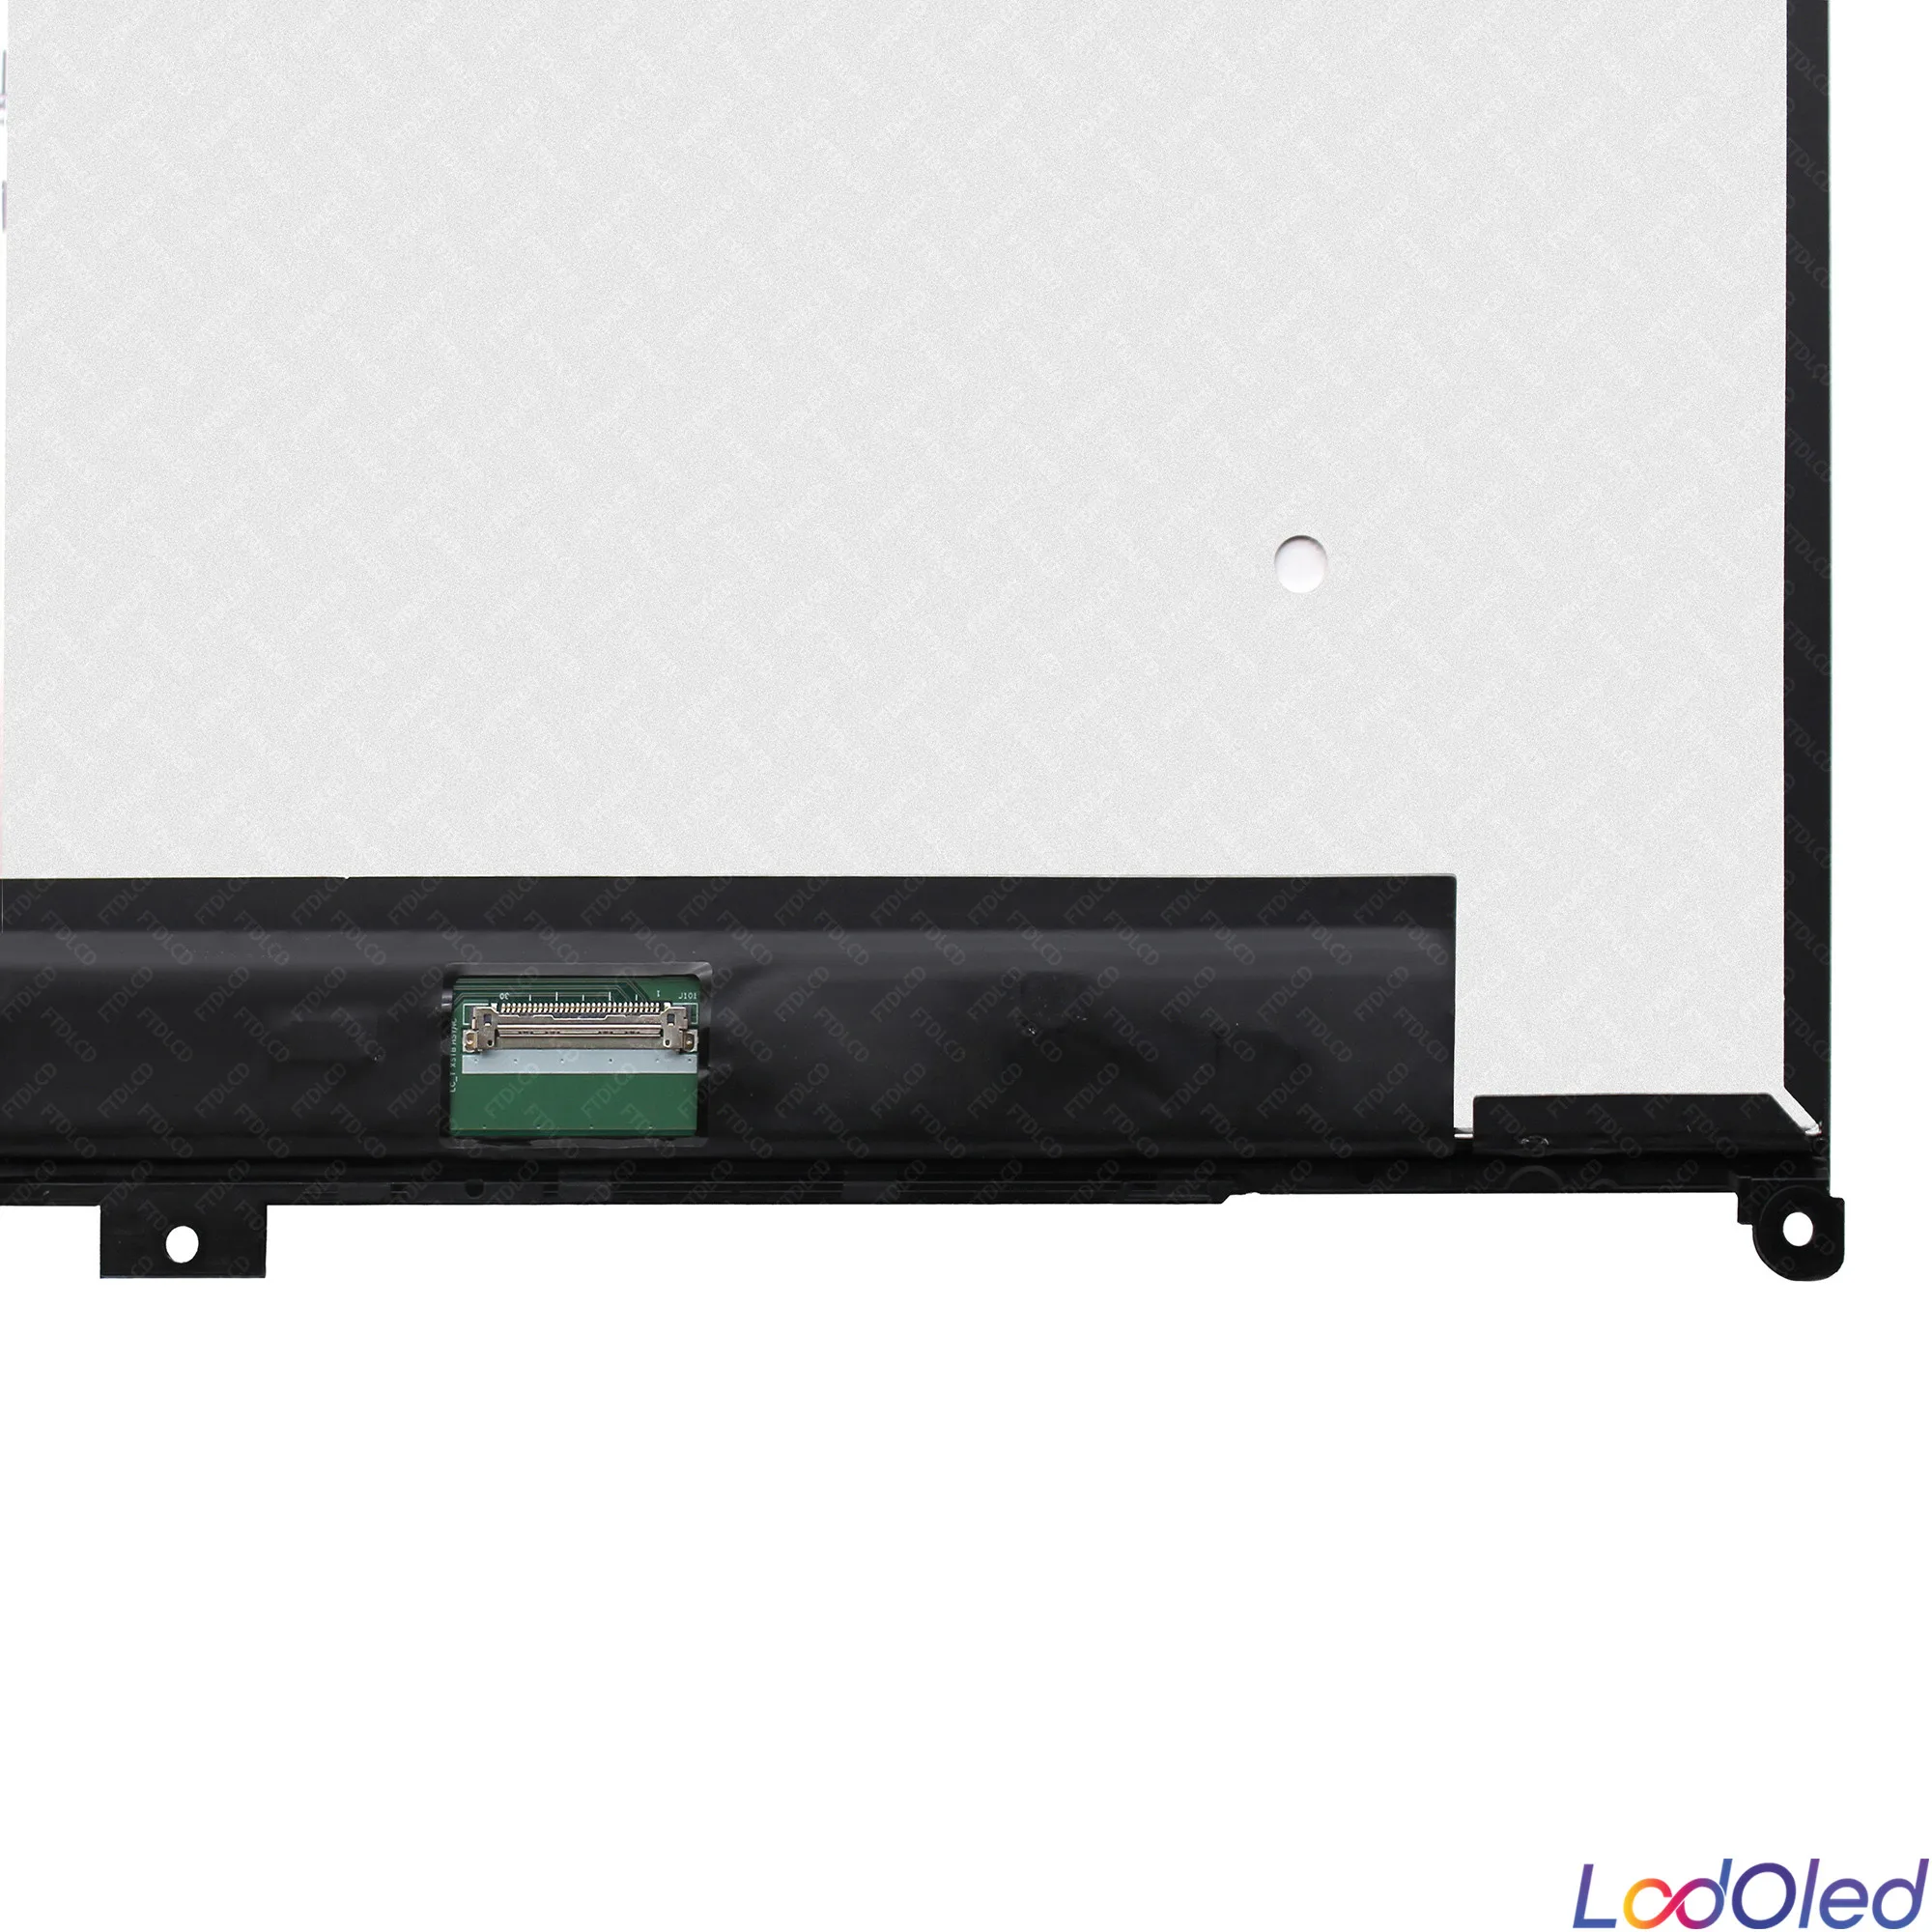 15 6 fhd ips lcd screen display panel touch digitizer glass assembly with bezel frame for lenovo ideapad flex 5 15itl05 82ht free global shipping